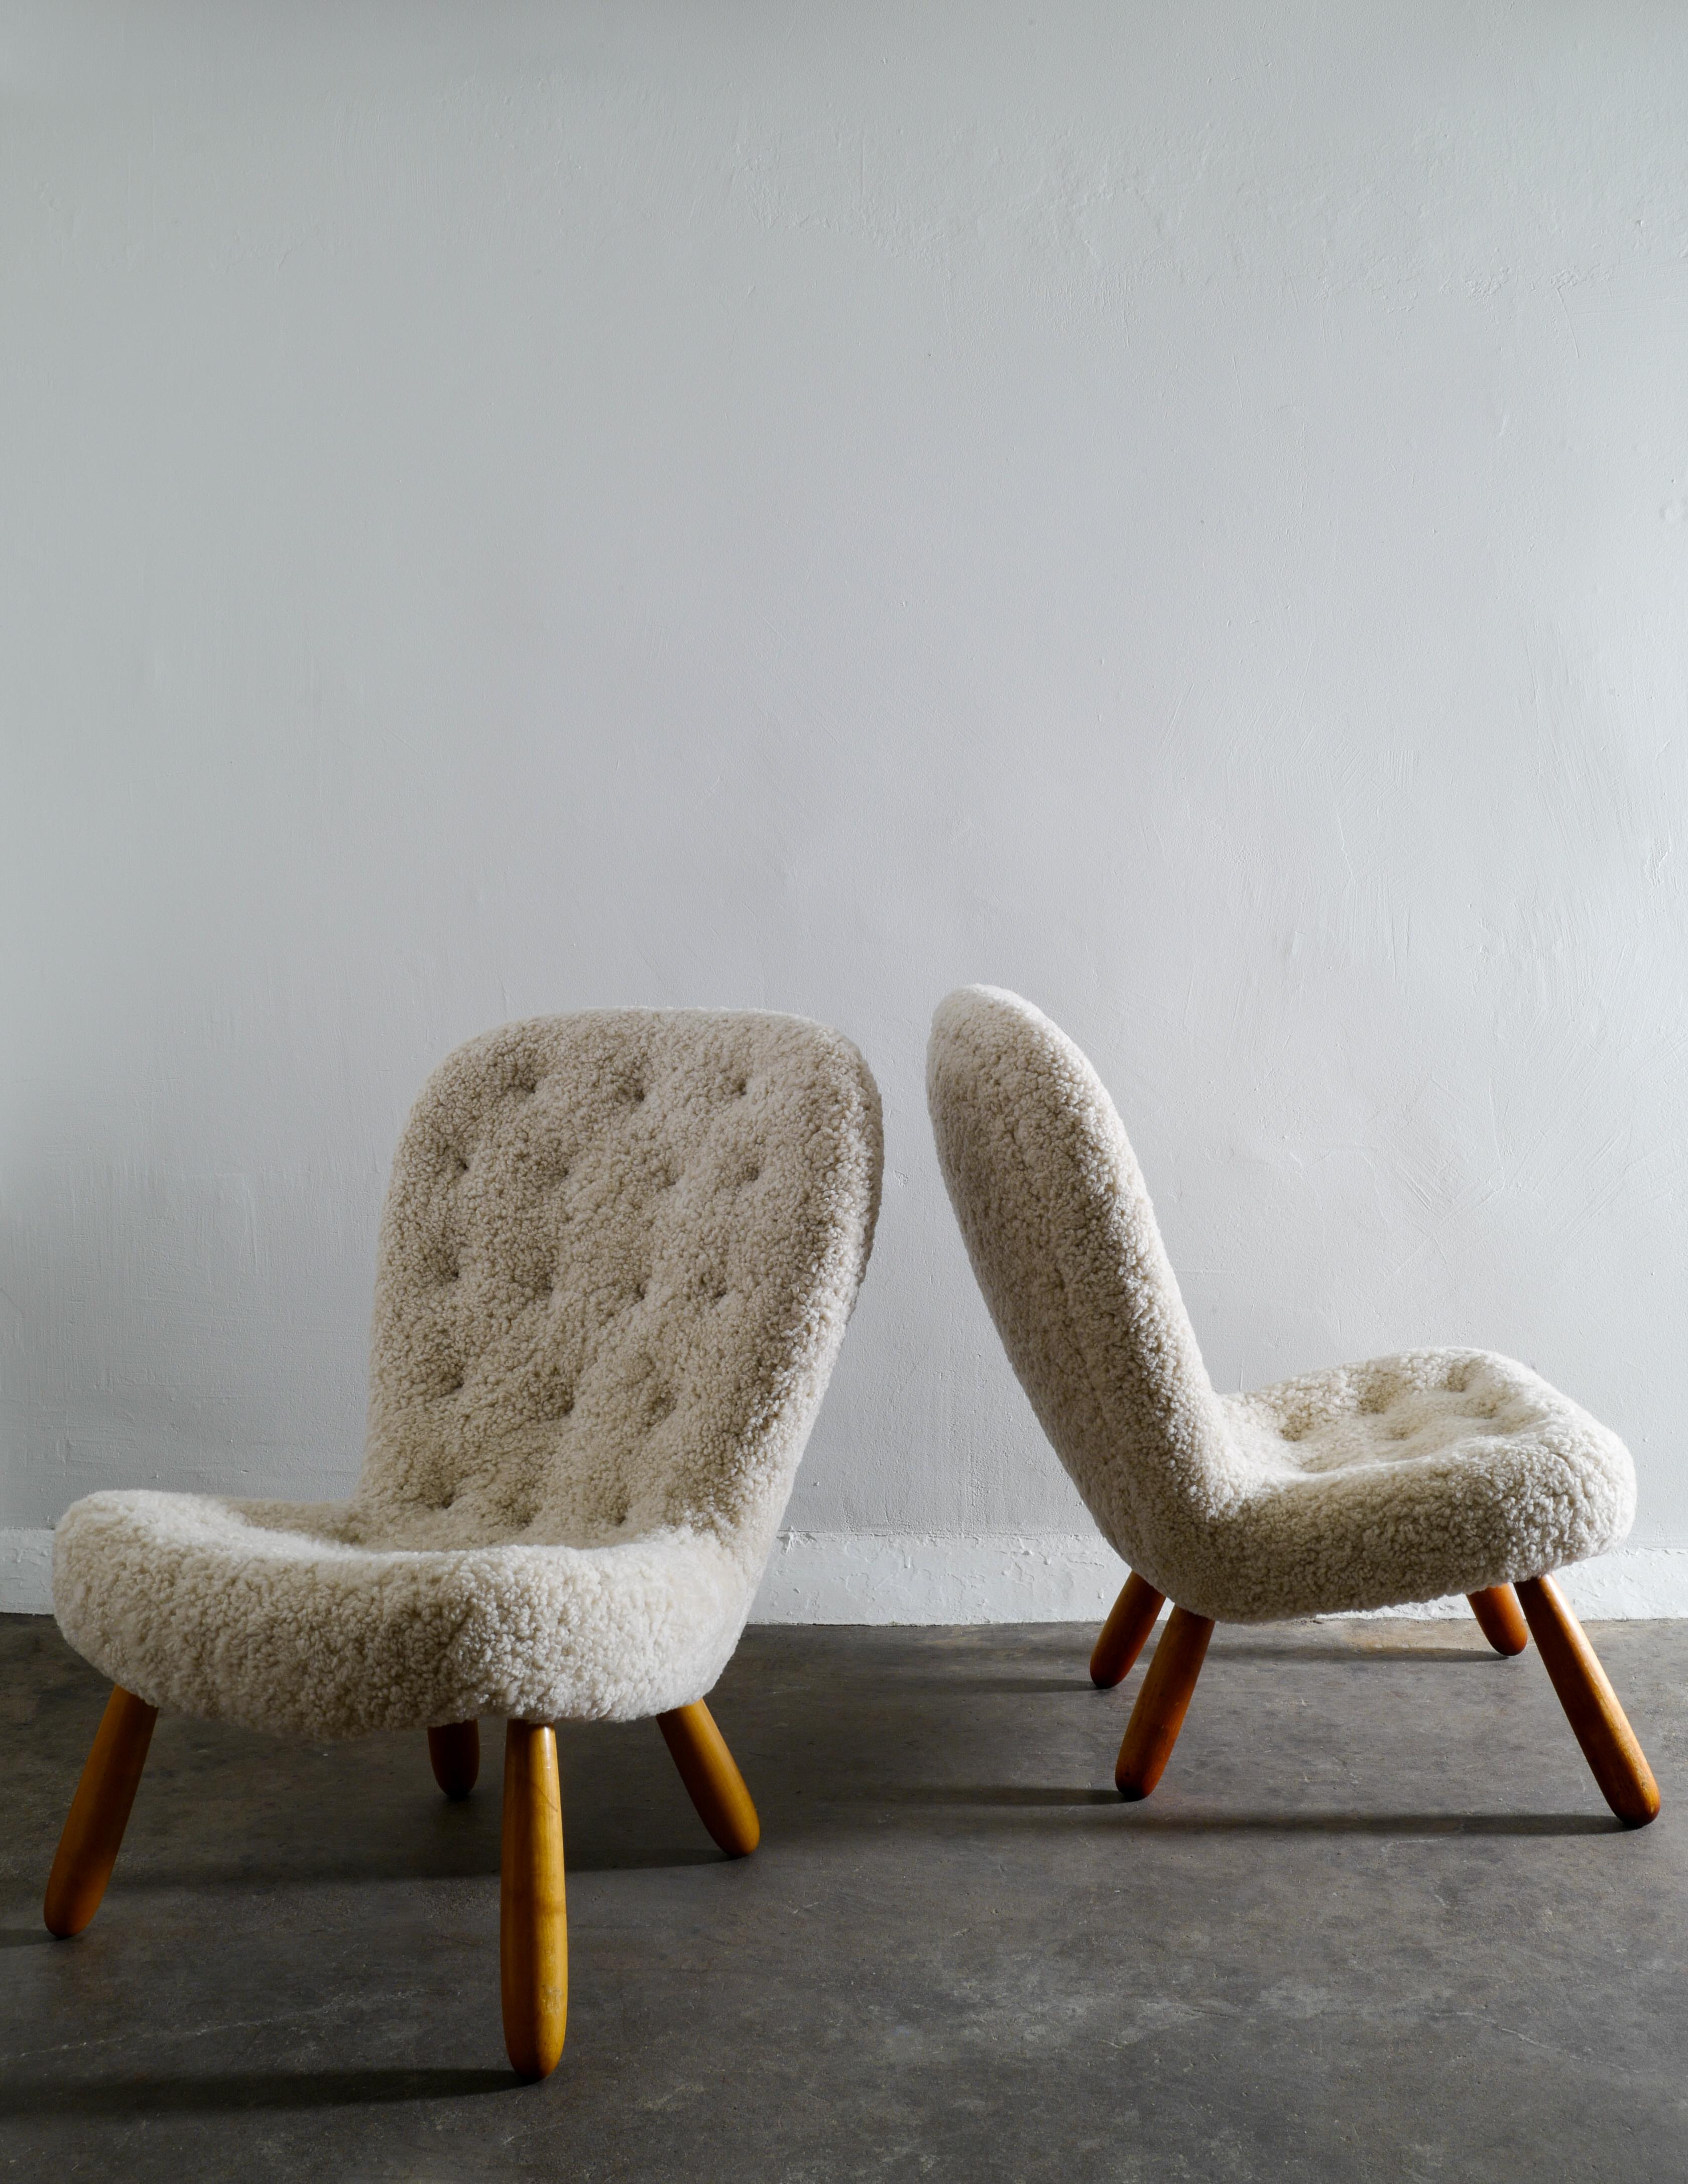 Rare pair of clam chairs by Philip Arctander produced in Denmark in the 1940s. Both chairs have newly been restored and upholstered in an 